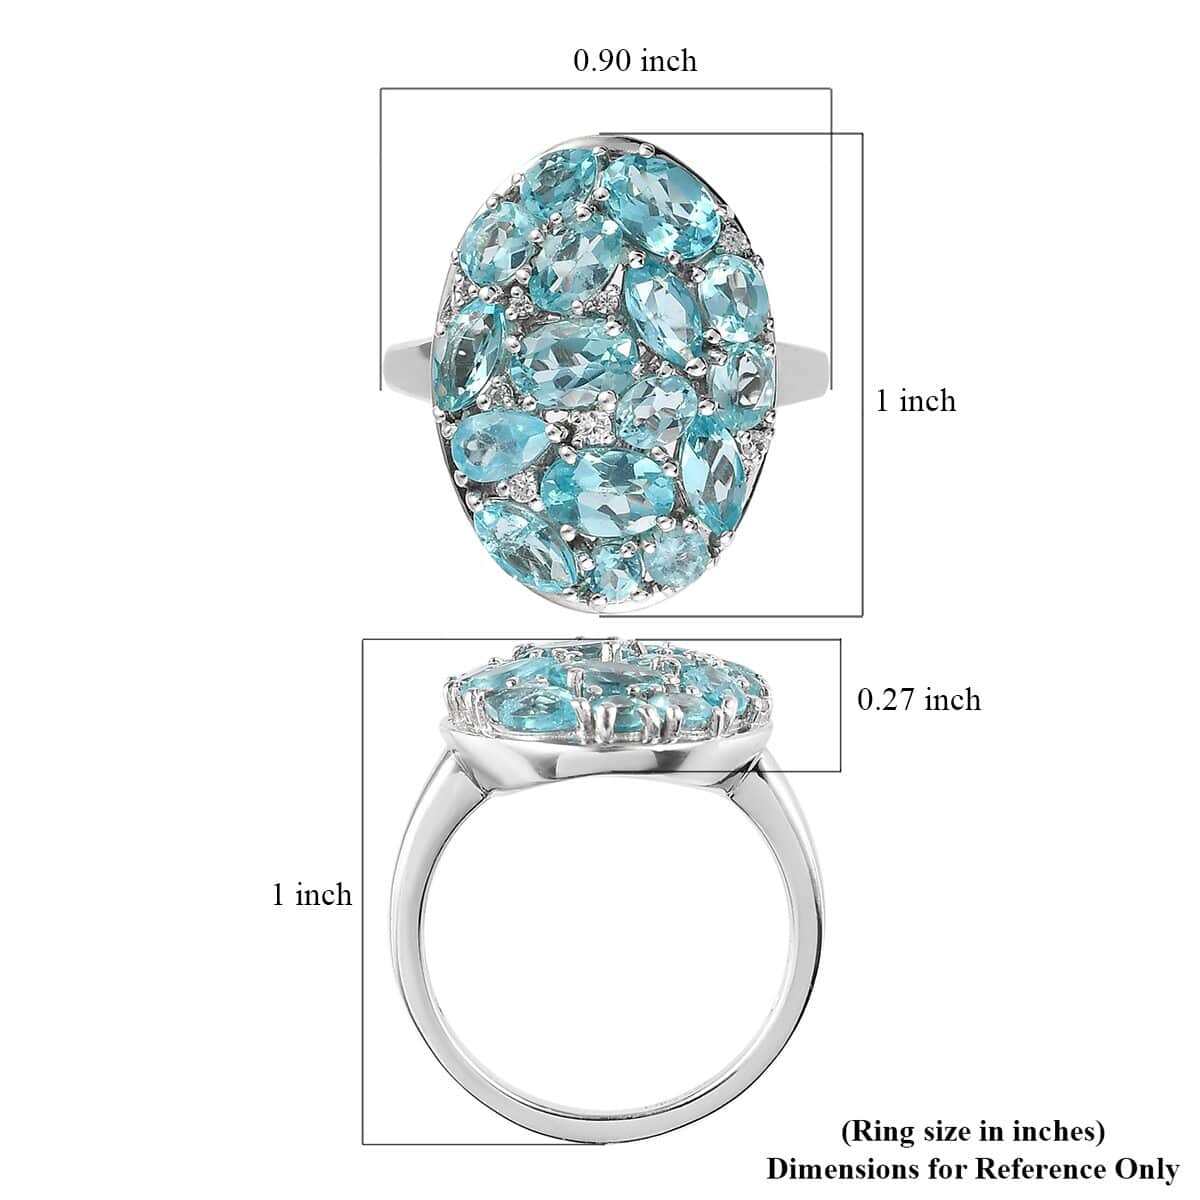 Madagascar Paraiba Apatite and Natural White Zircon Elongated Ring in Platinum Over Sterling Silver 4.25 ctw (Delivery in 3-5 Business Days) image number 5